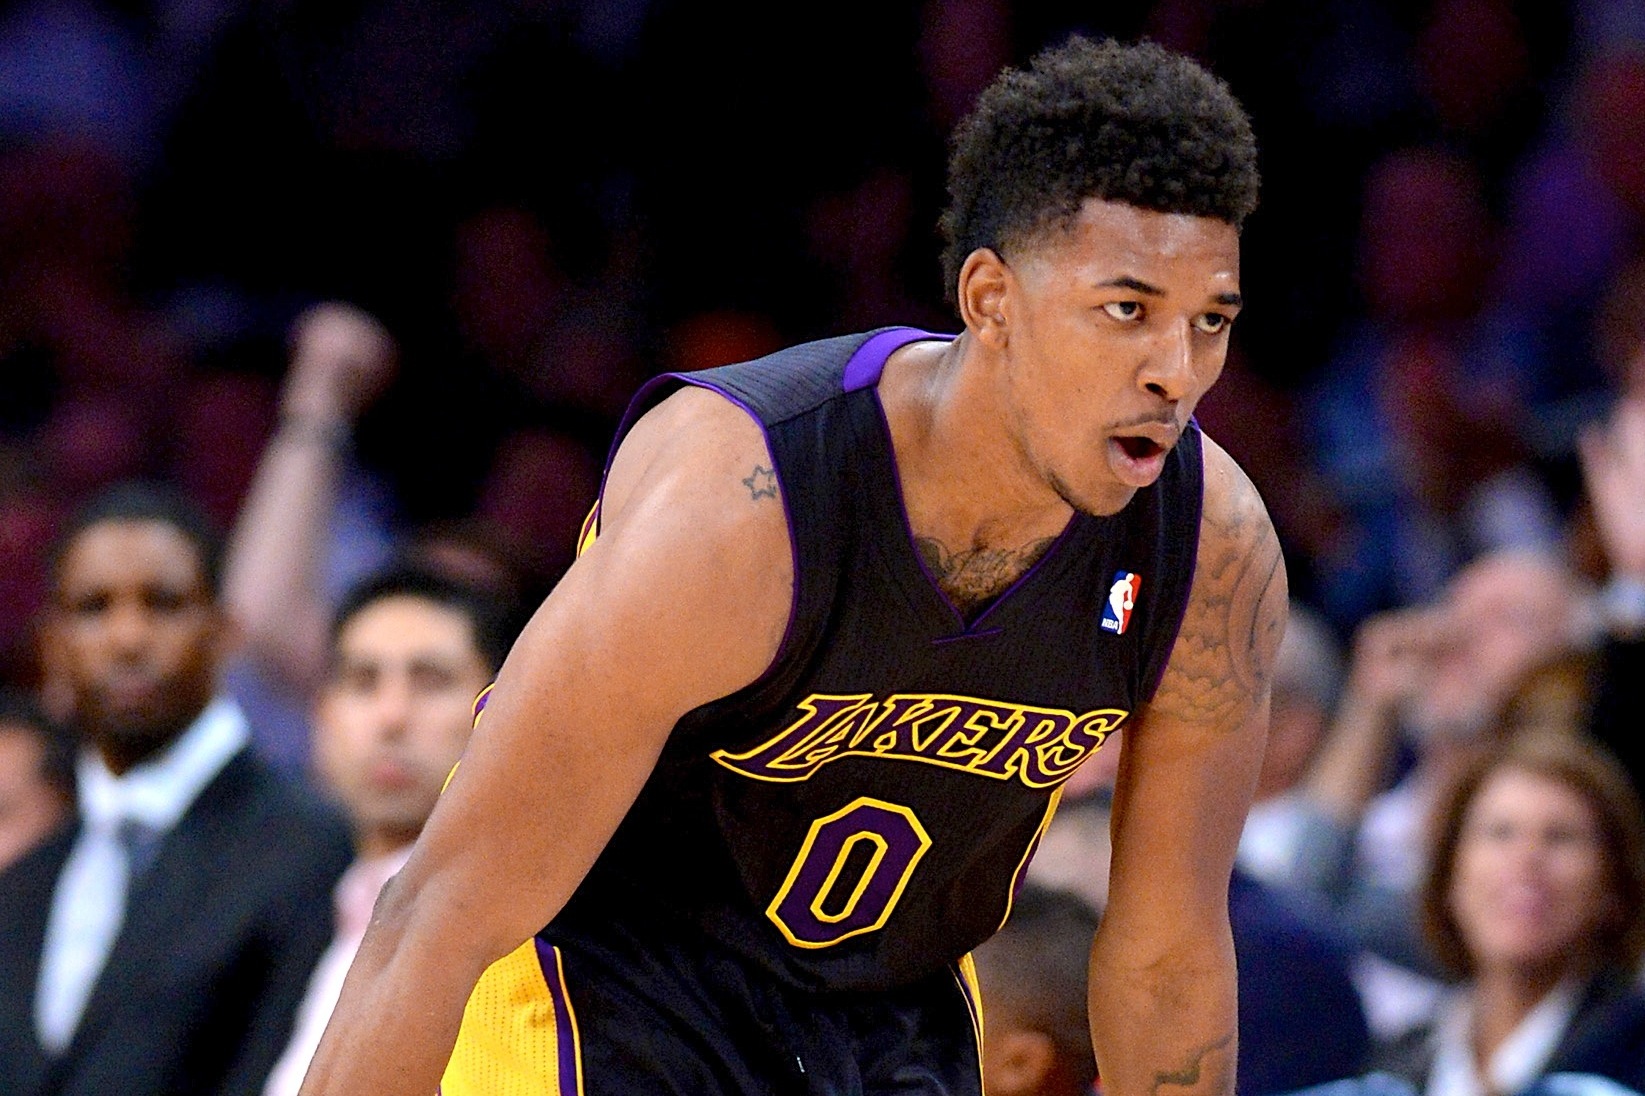 Lakers guard Nick Young says dolphin tried to kill him, steal rapper